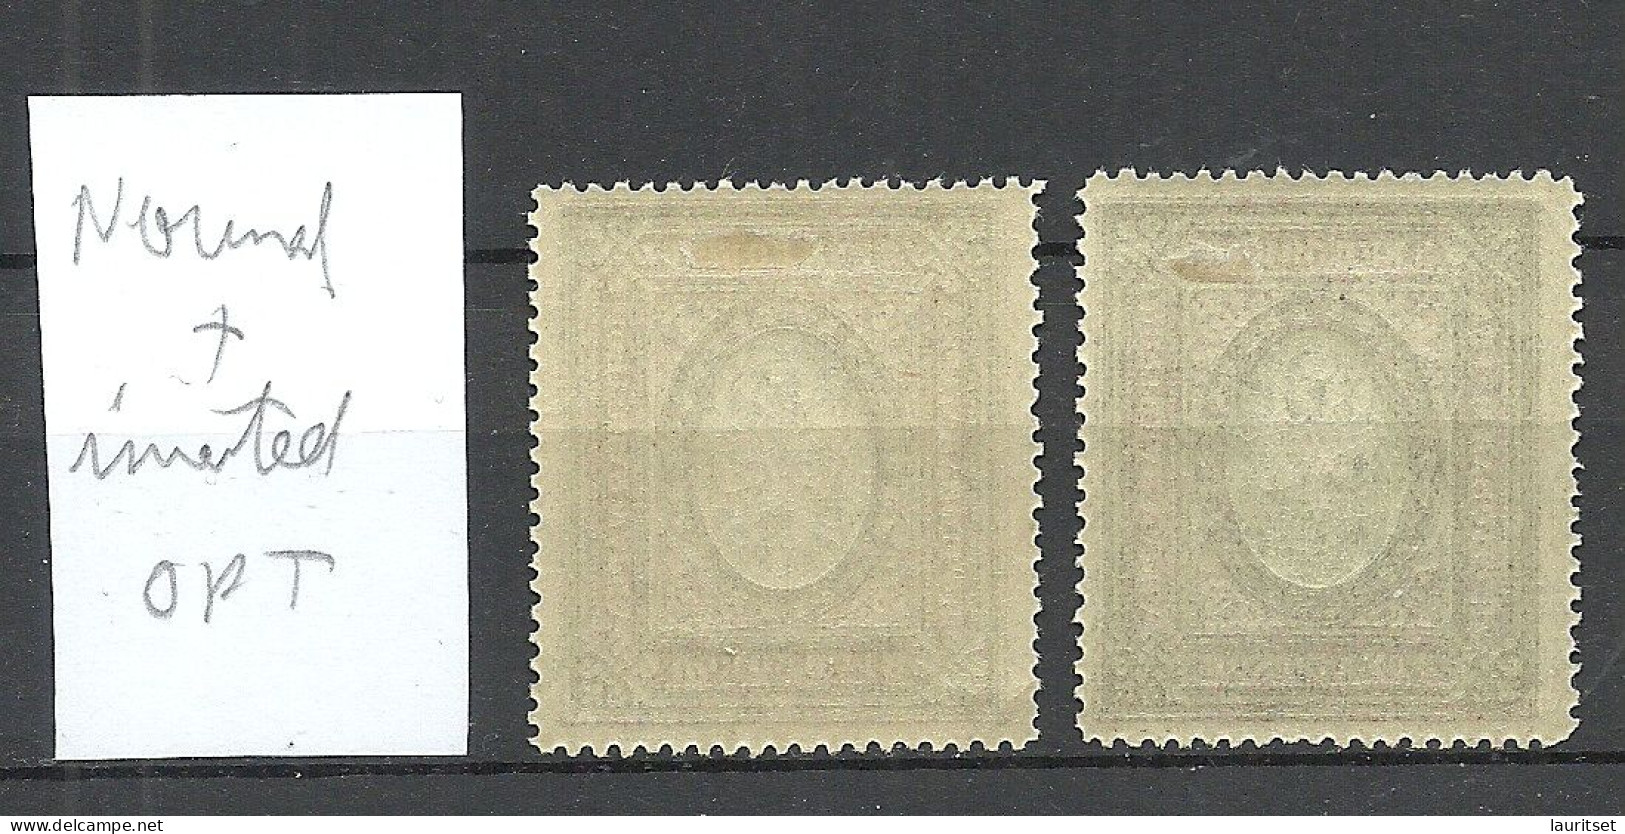 Russia RUSSLAND 1920 Civil War Wrangel Army Camp Post At Gallipoli 20 000 On 3,50 R. Perforated, Normal + INVERTED OPT * - Wrangel Army